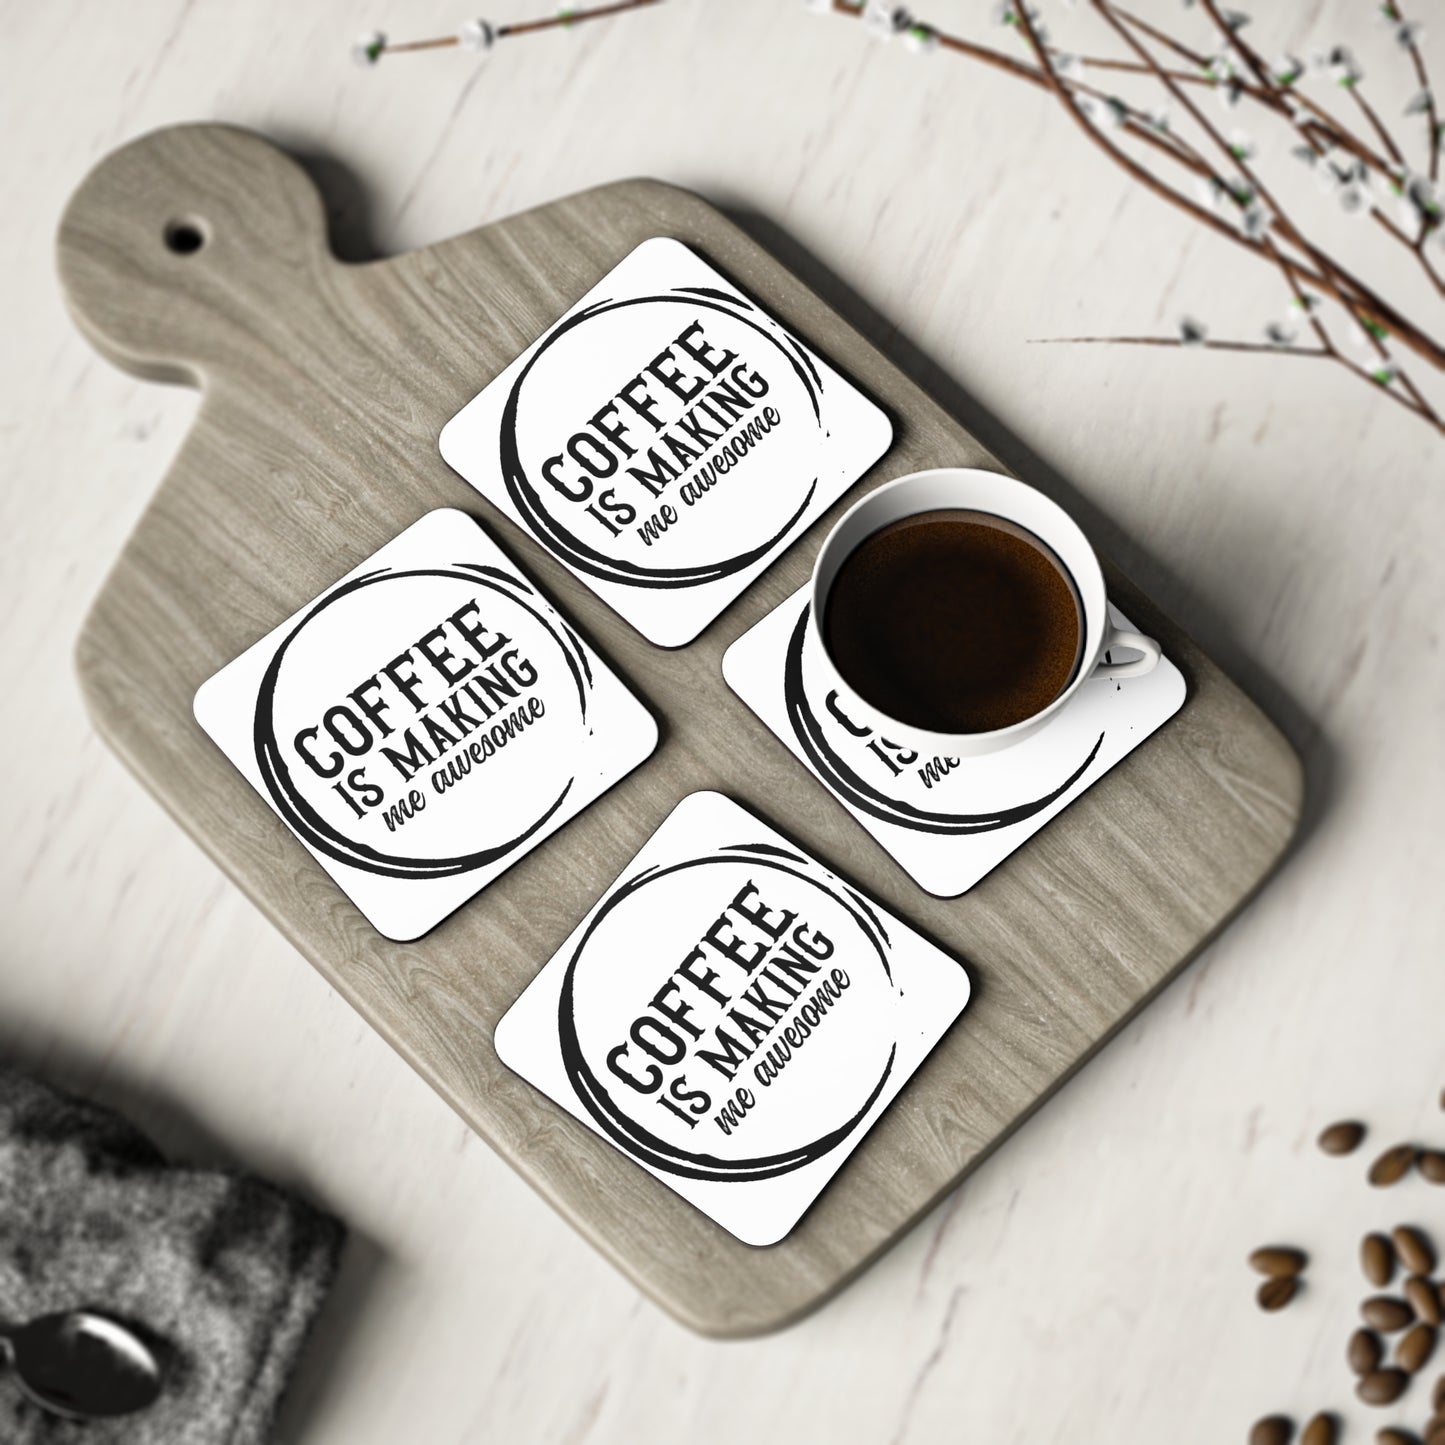 "Coffee Is Making Me Awesome" Square Coasters